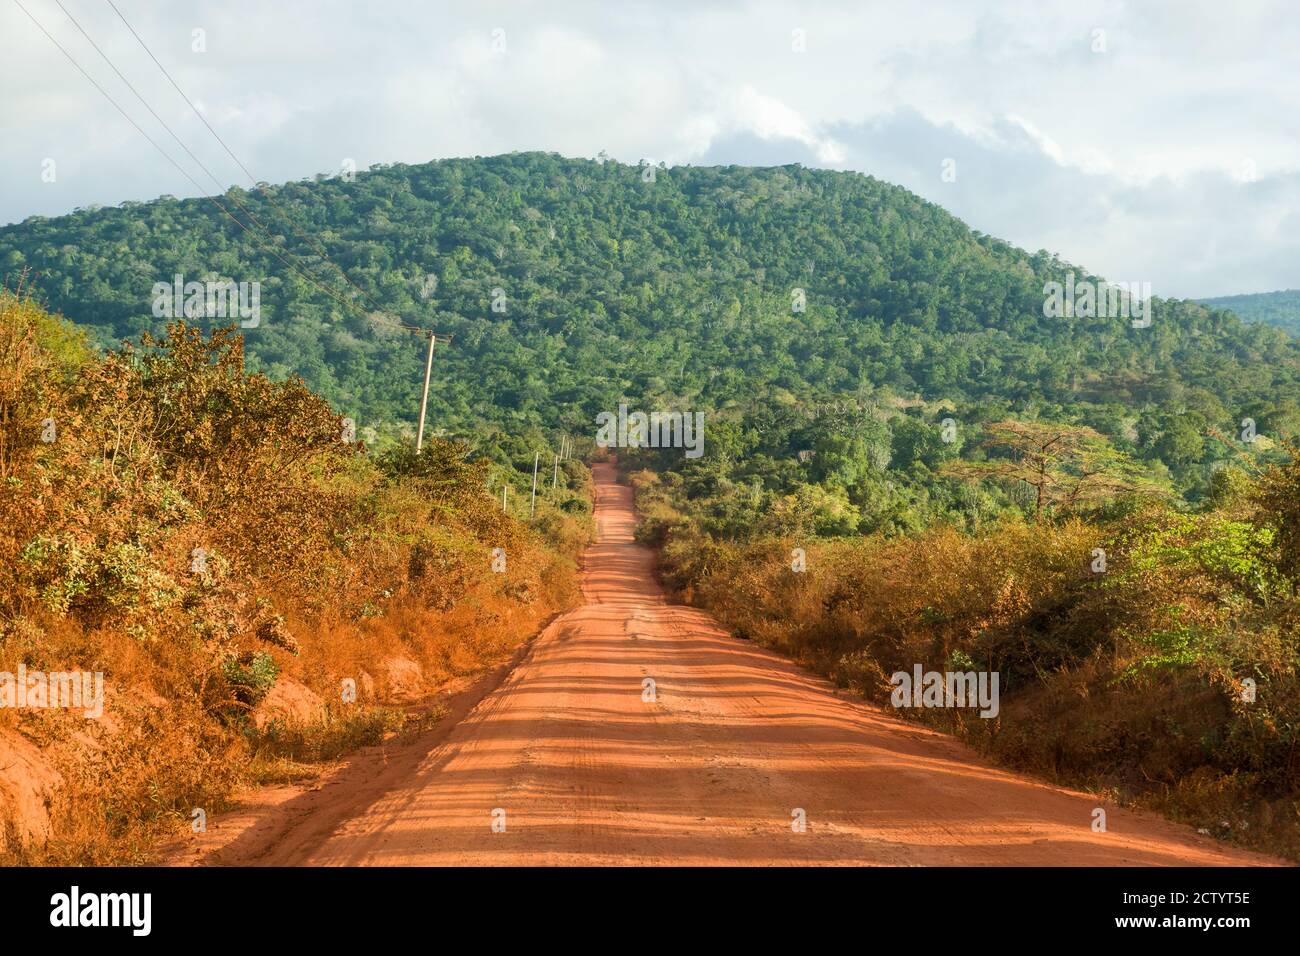 A section of the C106 unpaved dirt road with Shimba Hills in the background, Kenya, East Africa Stock Photo